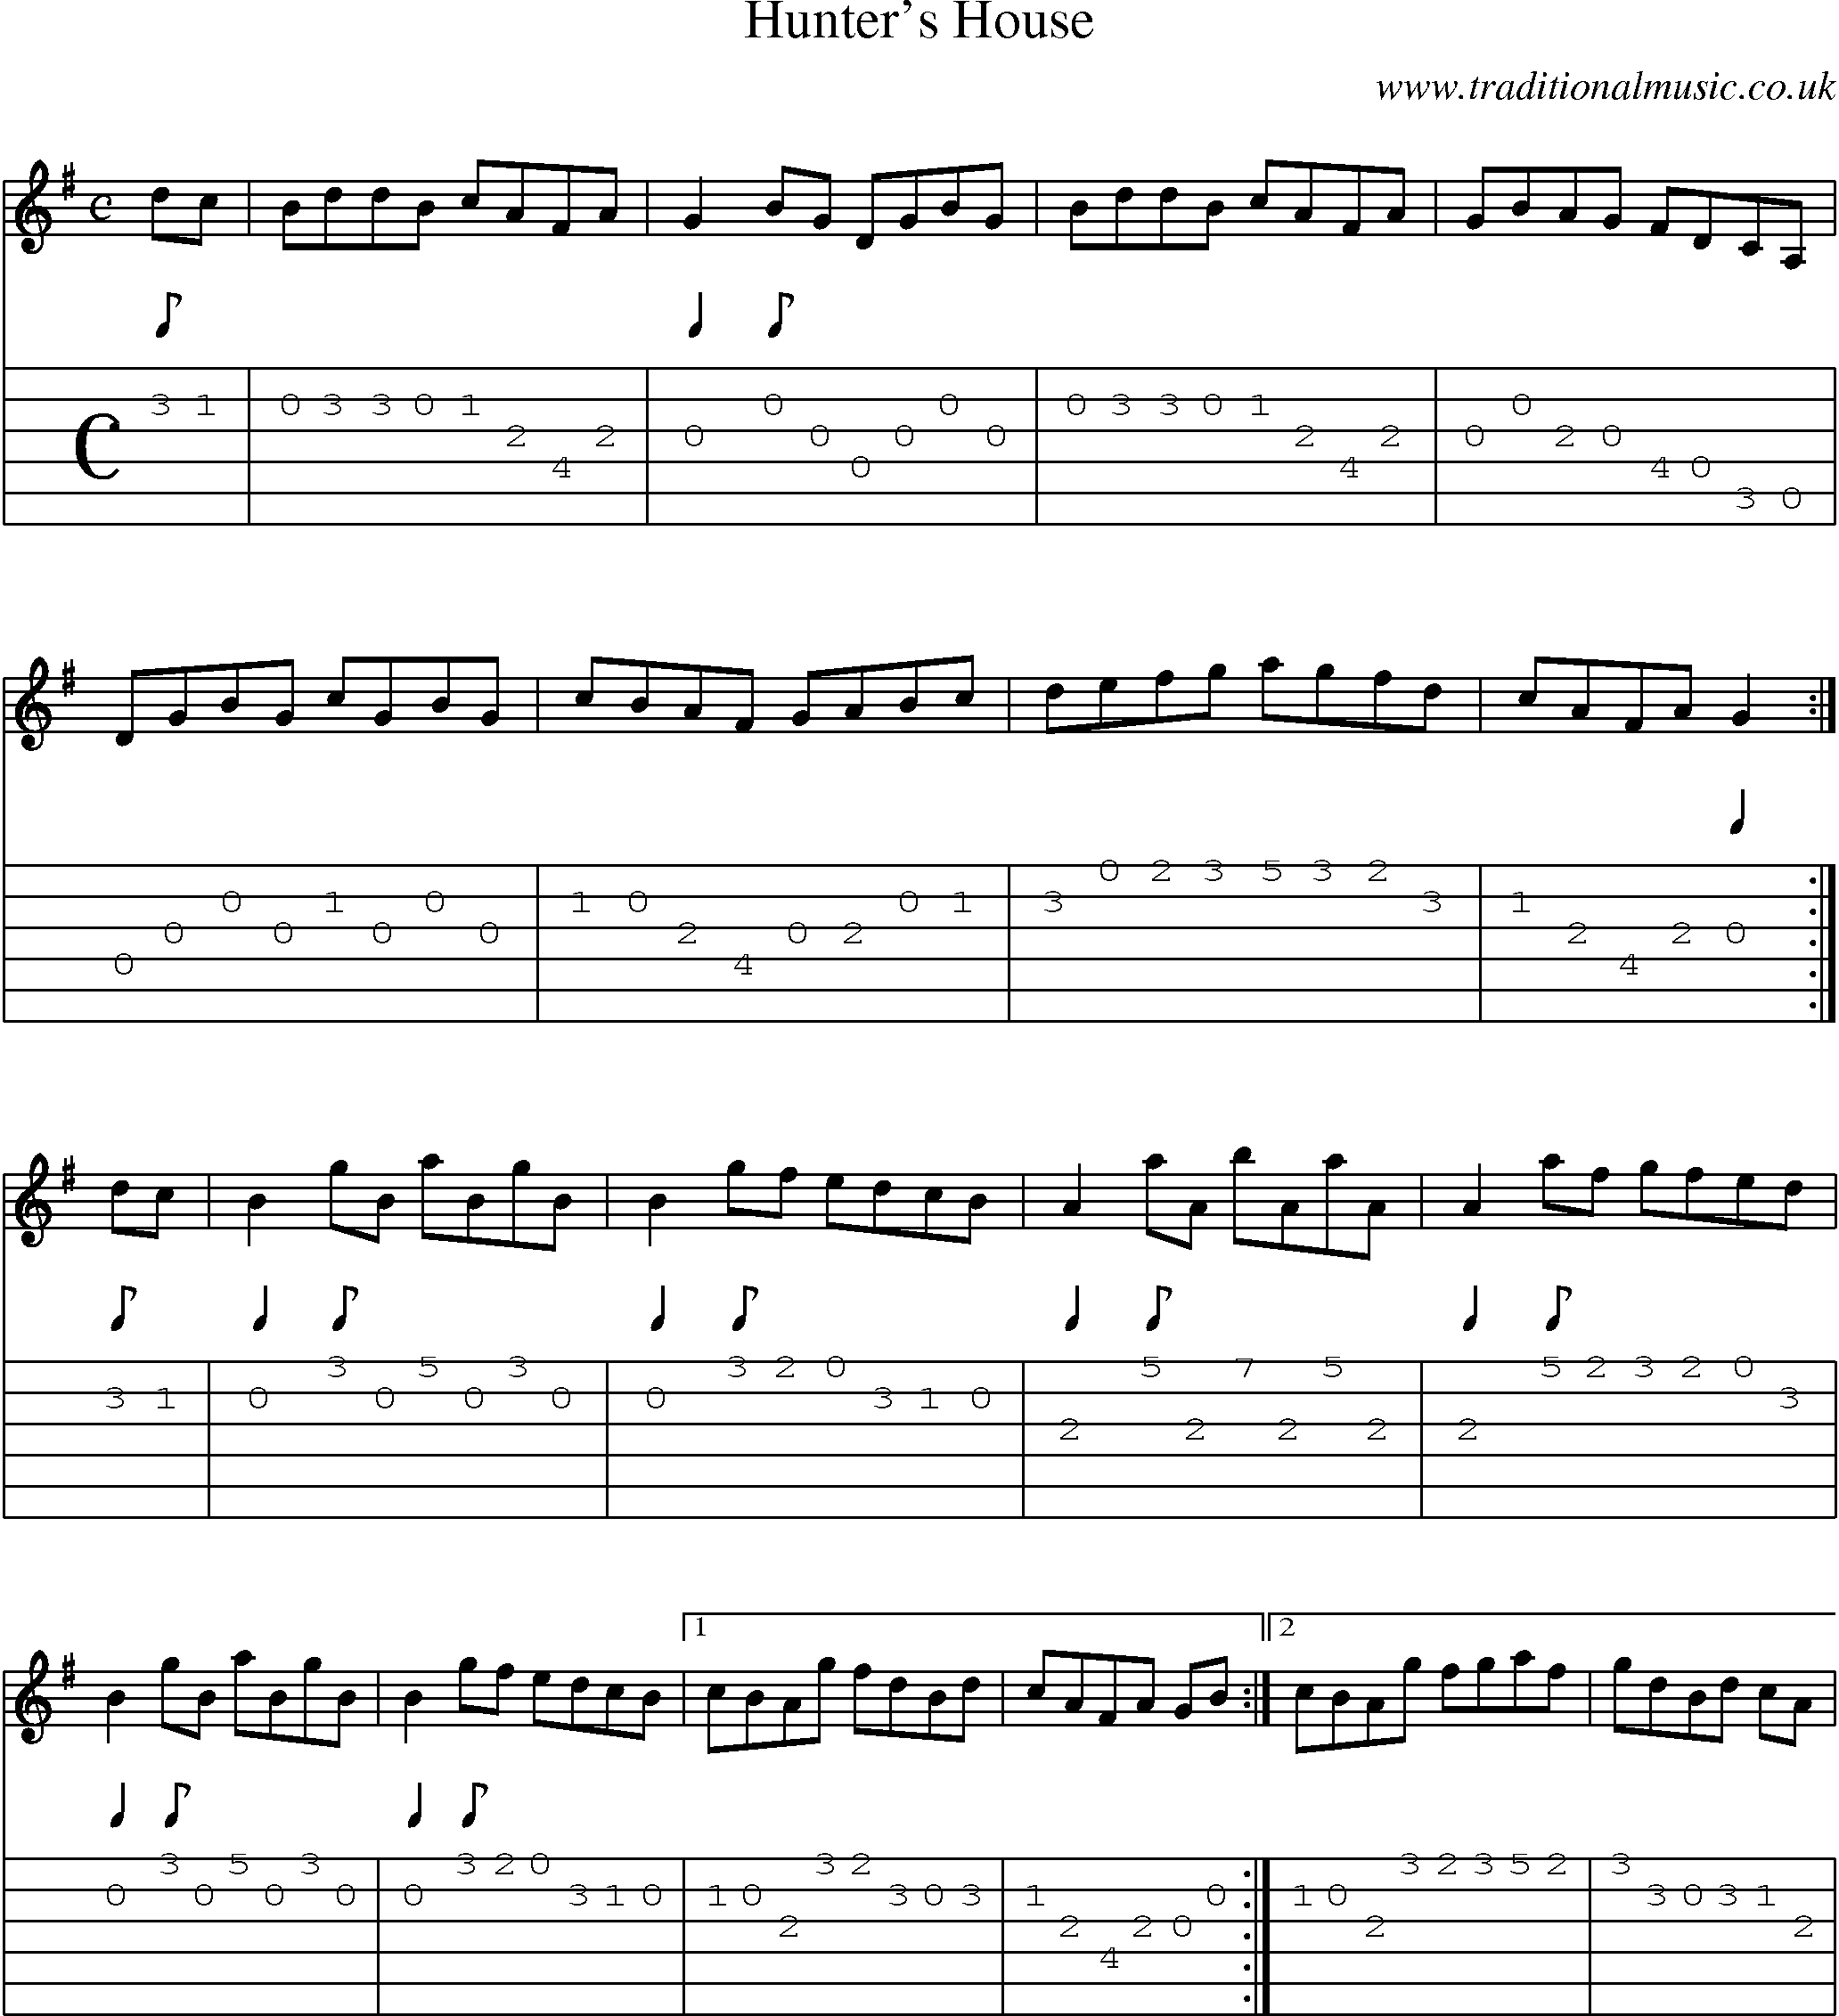 Music Score and Guitar Tabs for Hunters House